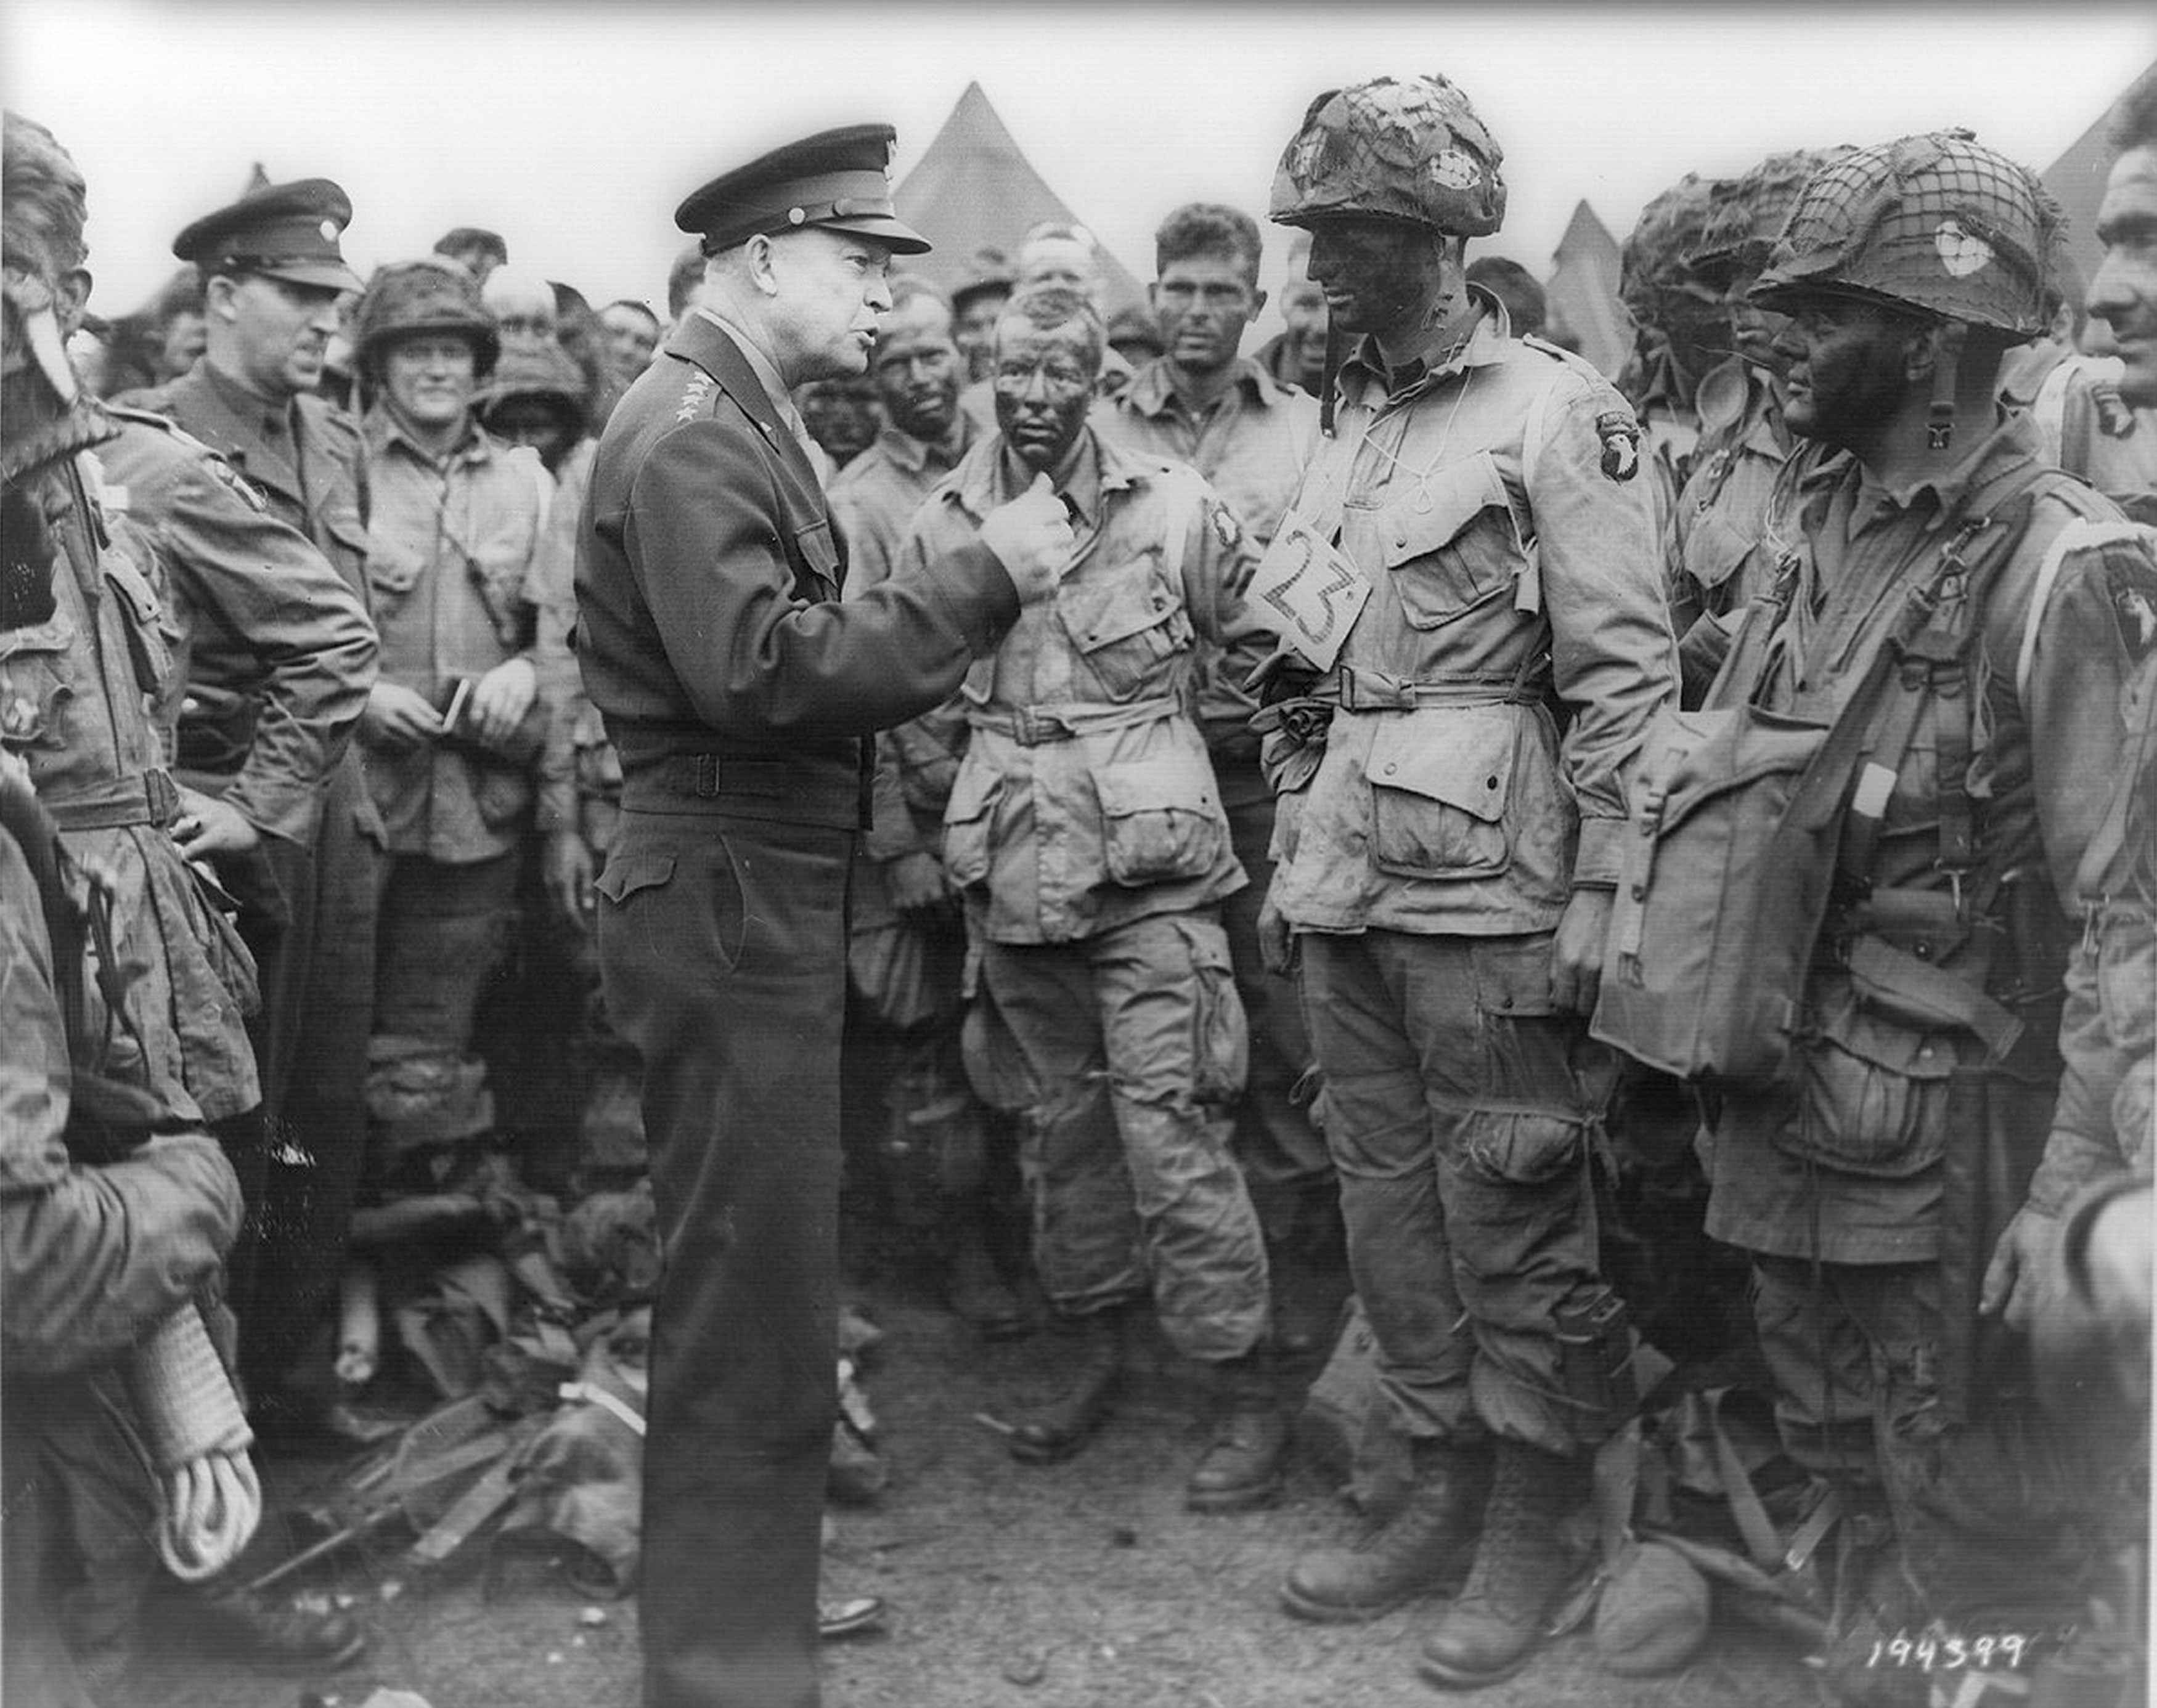 Handout photo of Allied forces Supreme Commander General Eisenhower speaking with U.S. Army paratroopers at Greenham Common Airfield in England